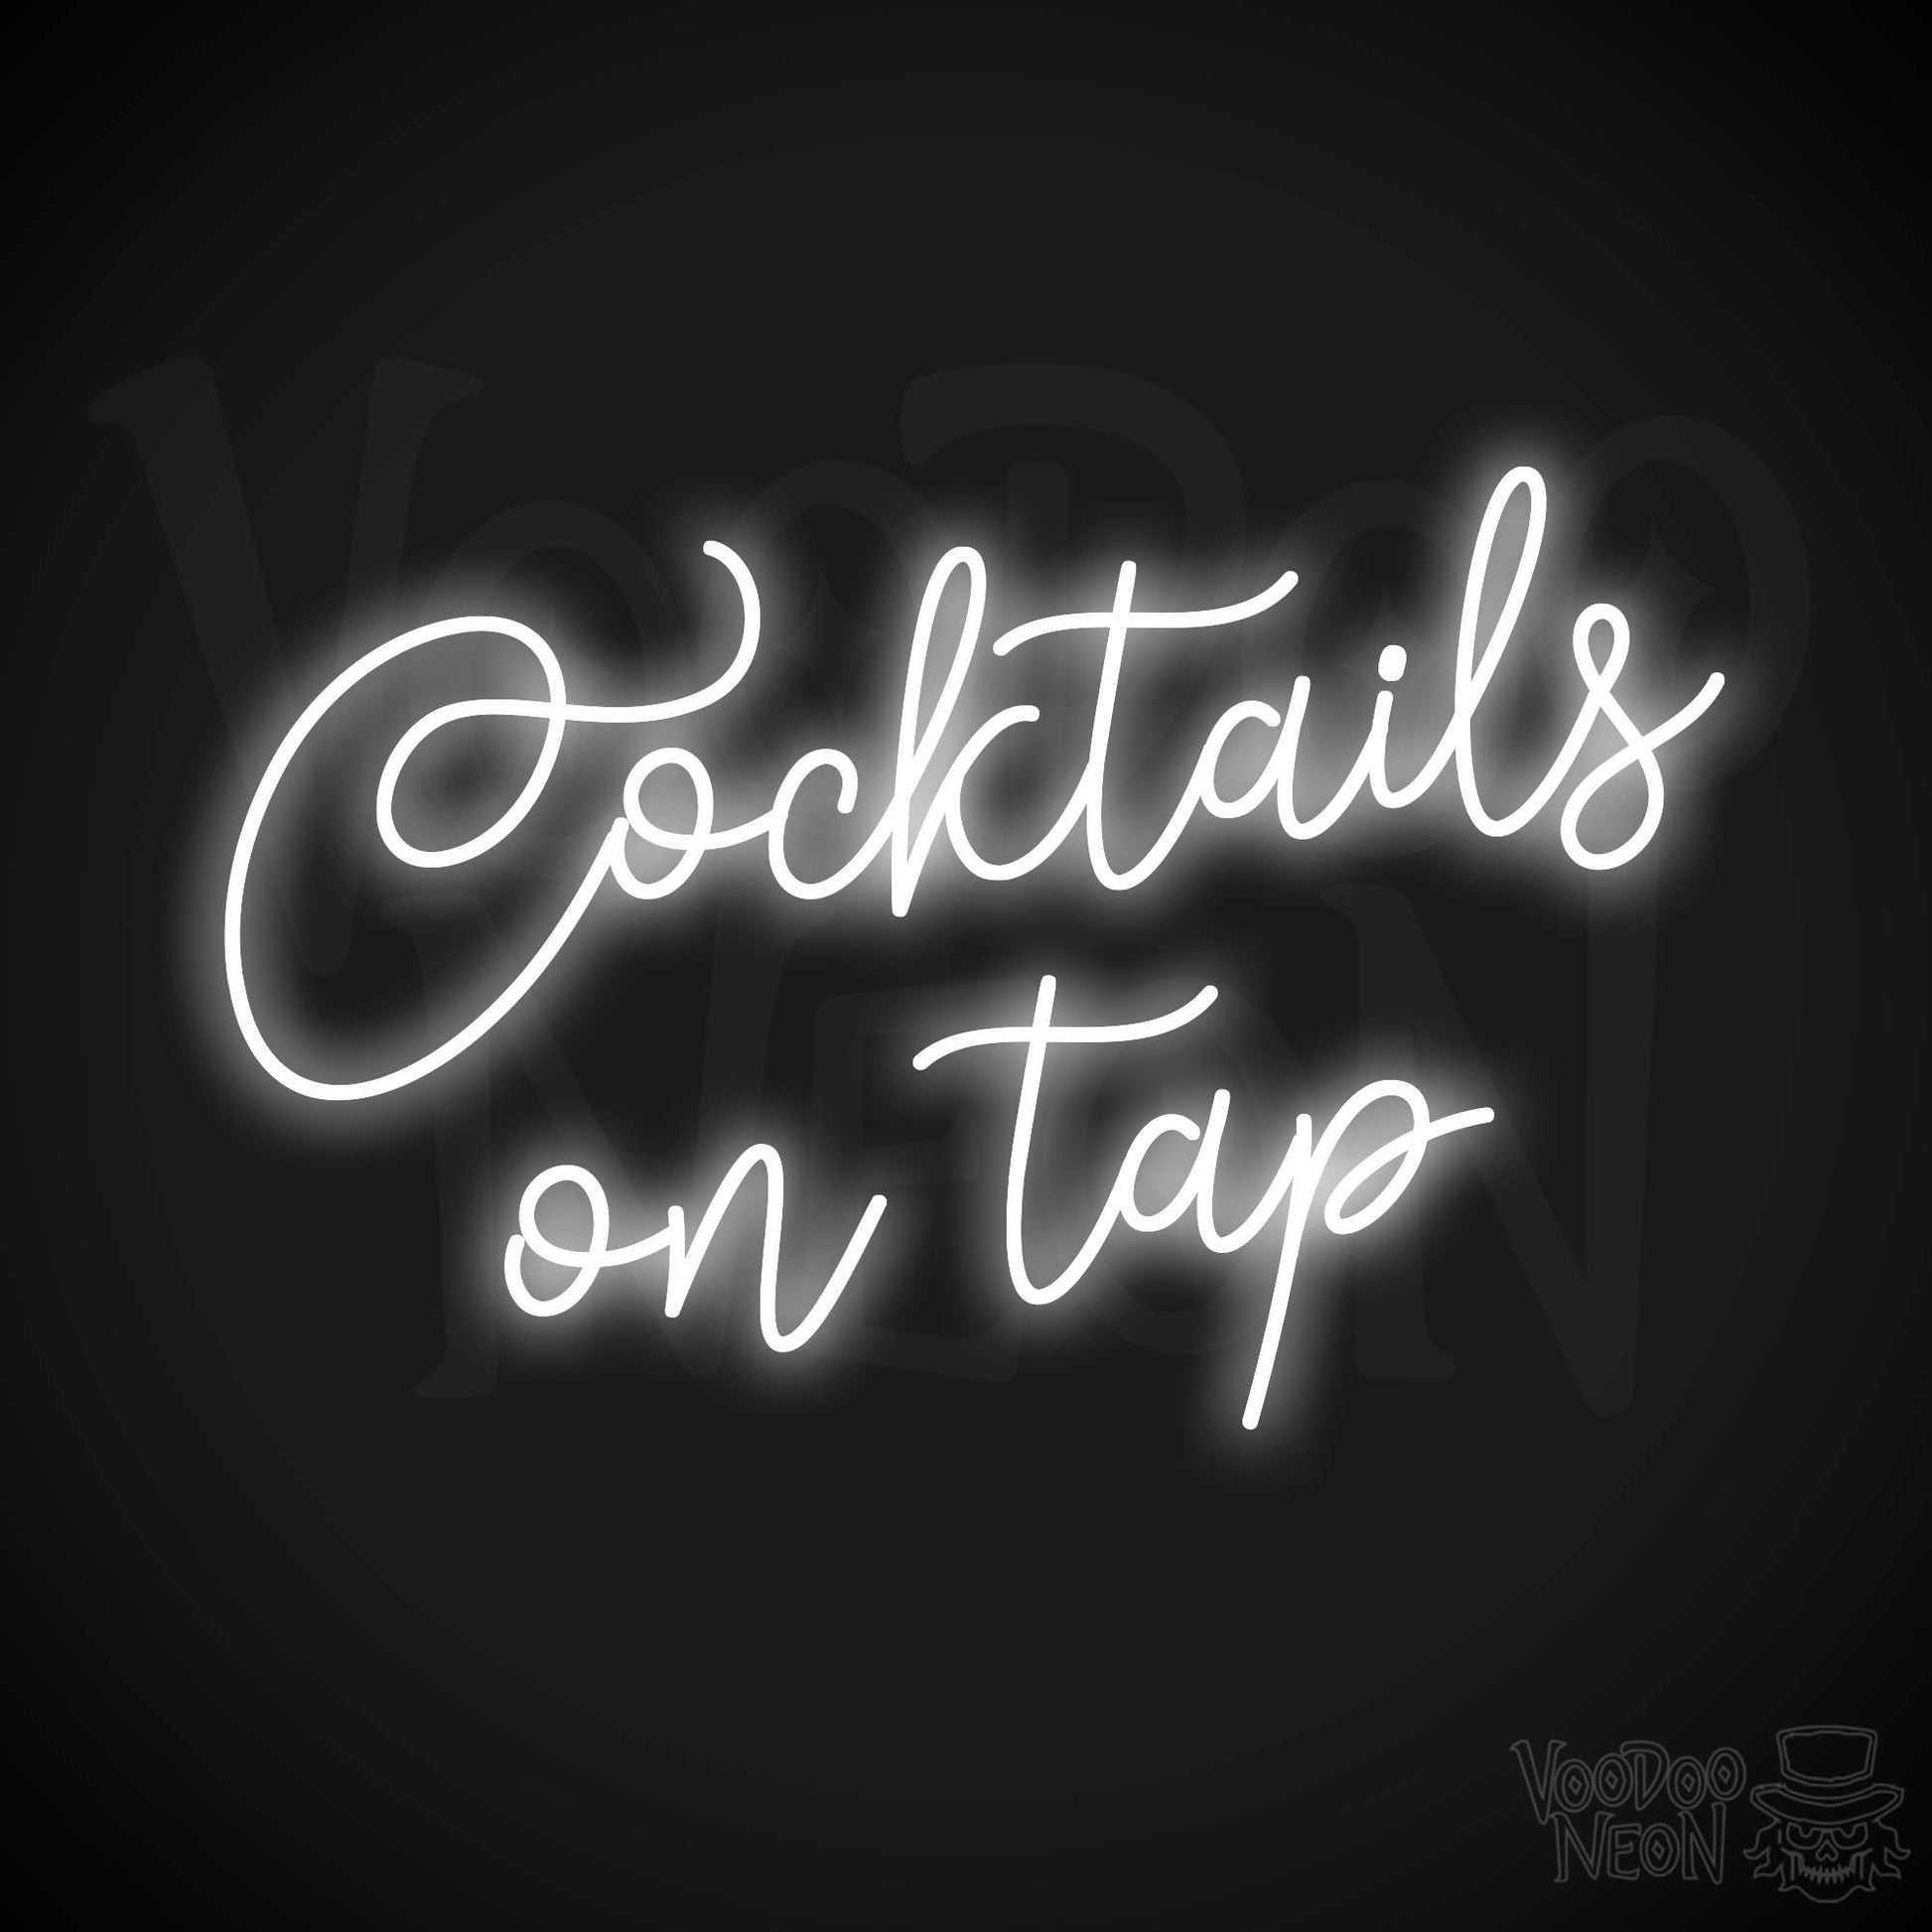 Cocktails On Tap LED Neon - White